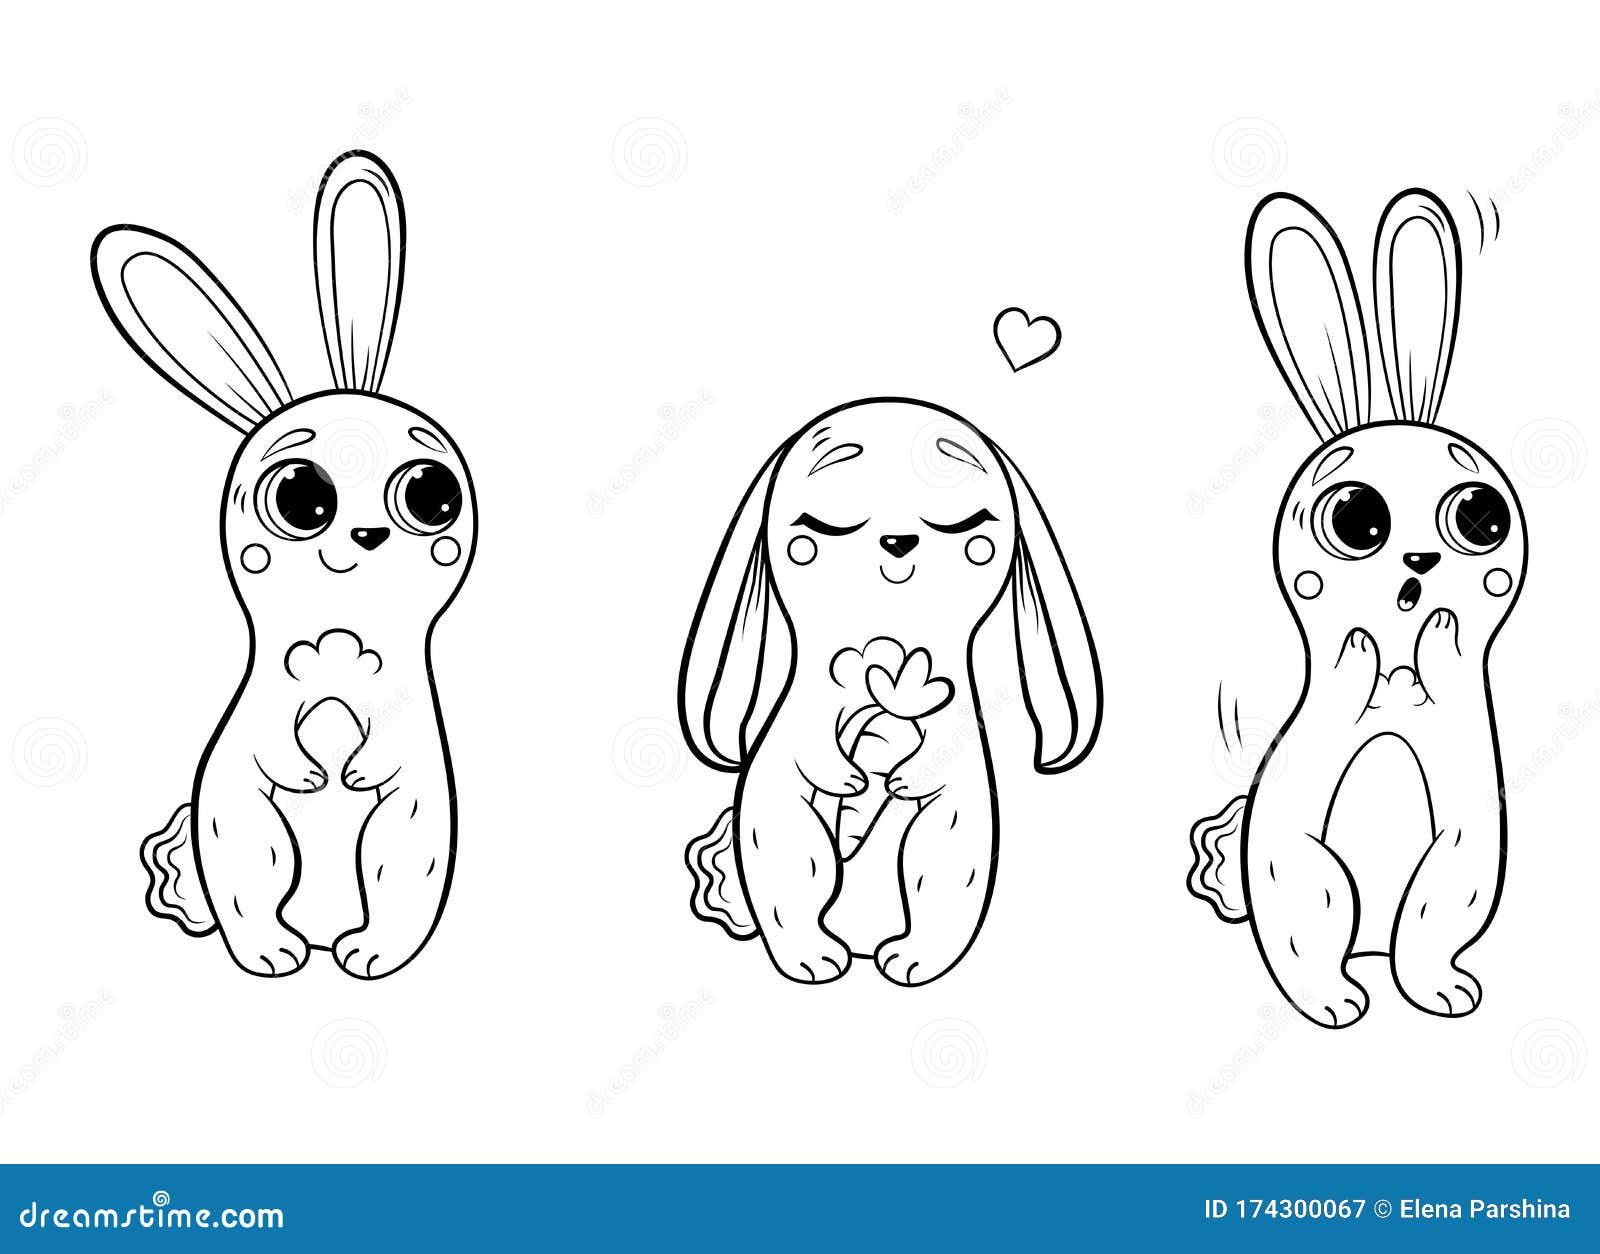 Coloring Page Outline of Cute Cartoon Hares. Rabbit in Different ...